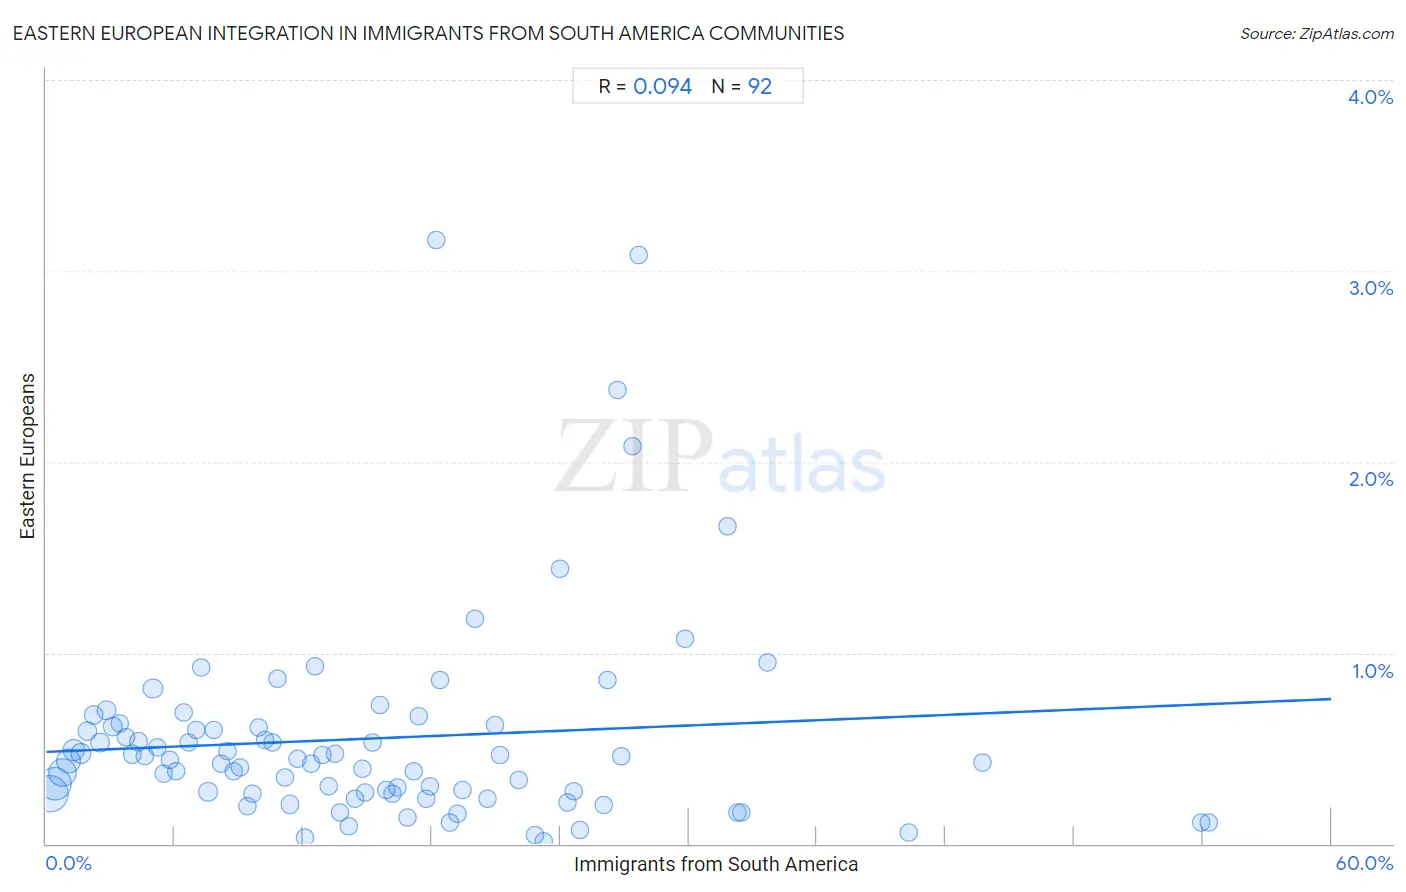 Immigrants from South America Integration in Eastern European Communities